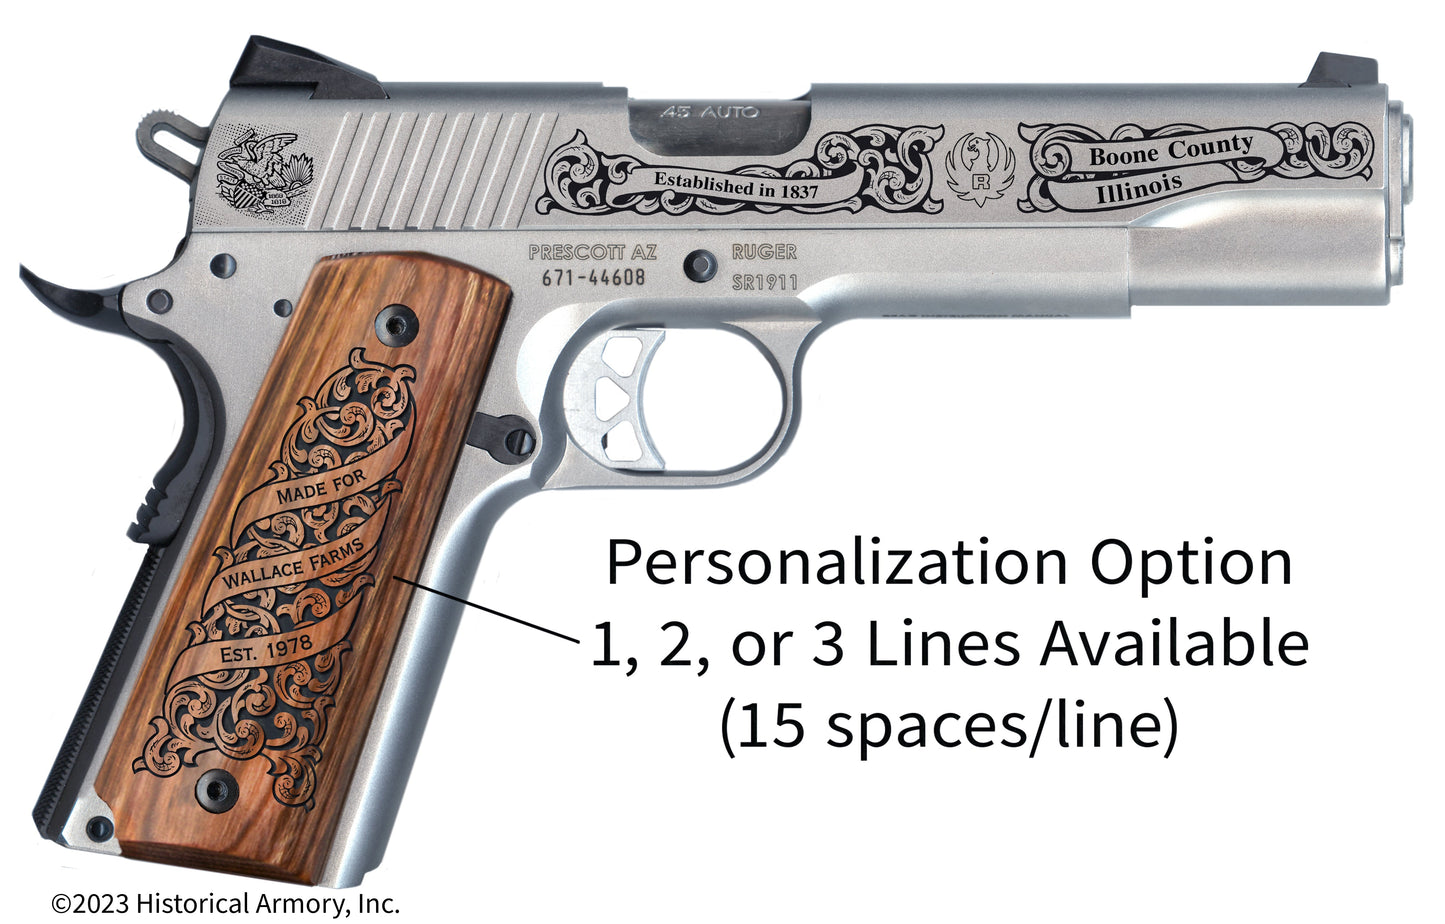 Boone County Illinois Personalized Engraved .45 Auto Ruger 1911